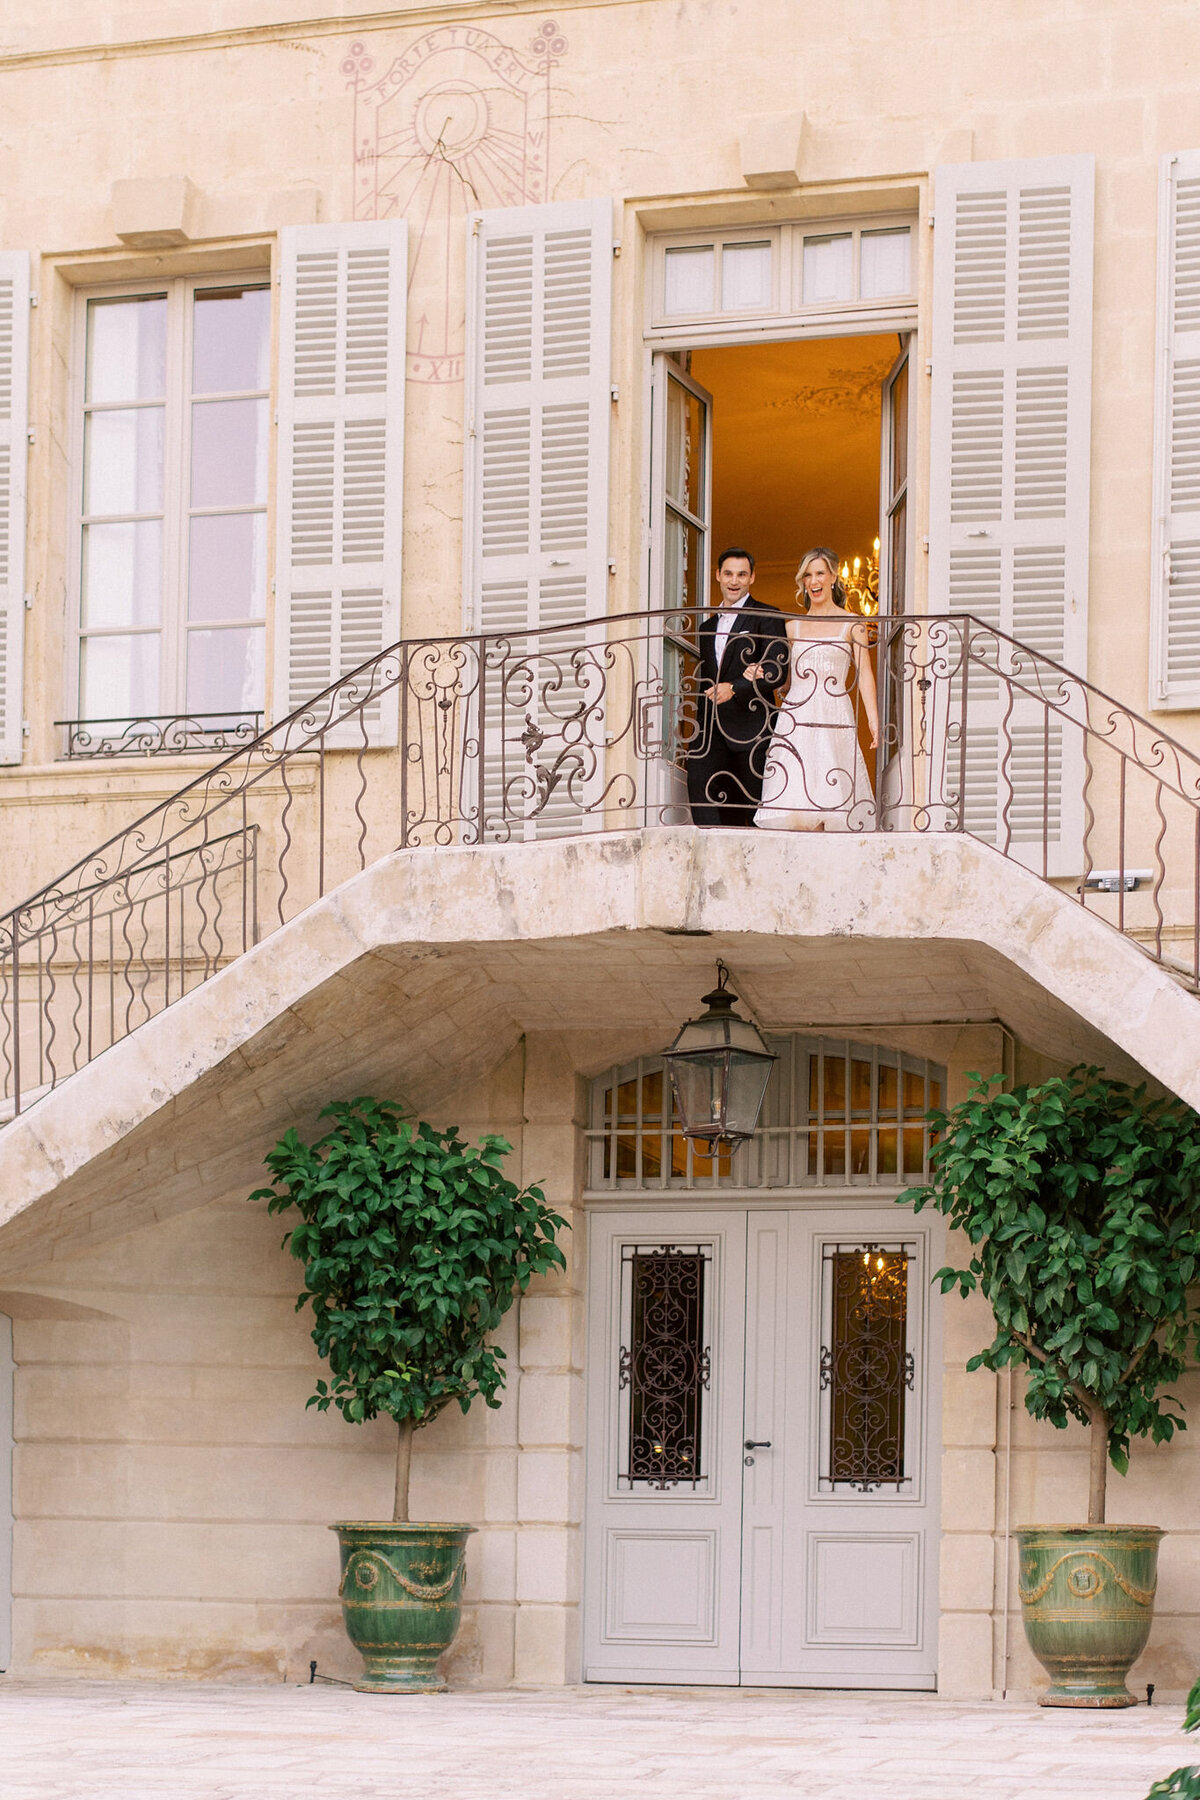 Jennifer Fox Weddings English speaking wedding planning & design agency in France crafting refined and bespoke weddings and celebrations Provence, Paris and destination MailysFortunePhotography_Jordan&Brian_704web